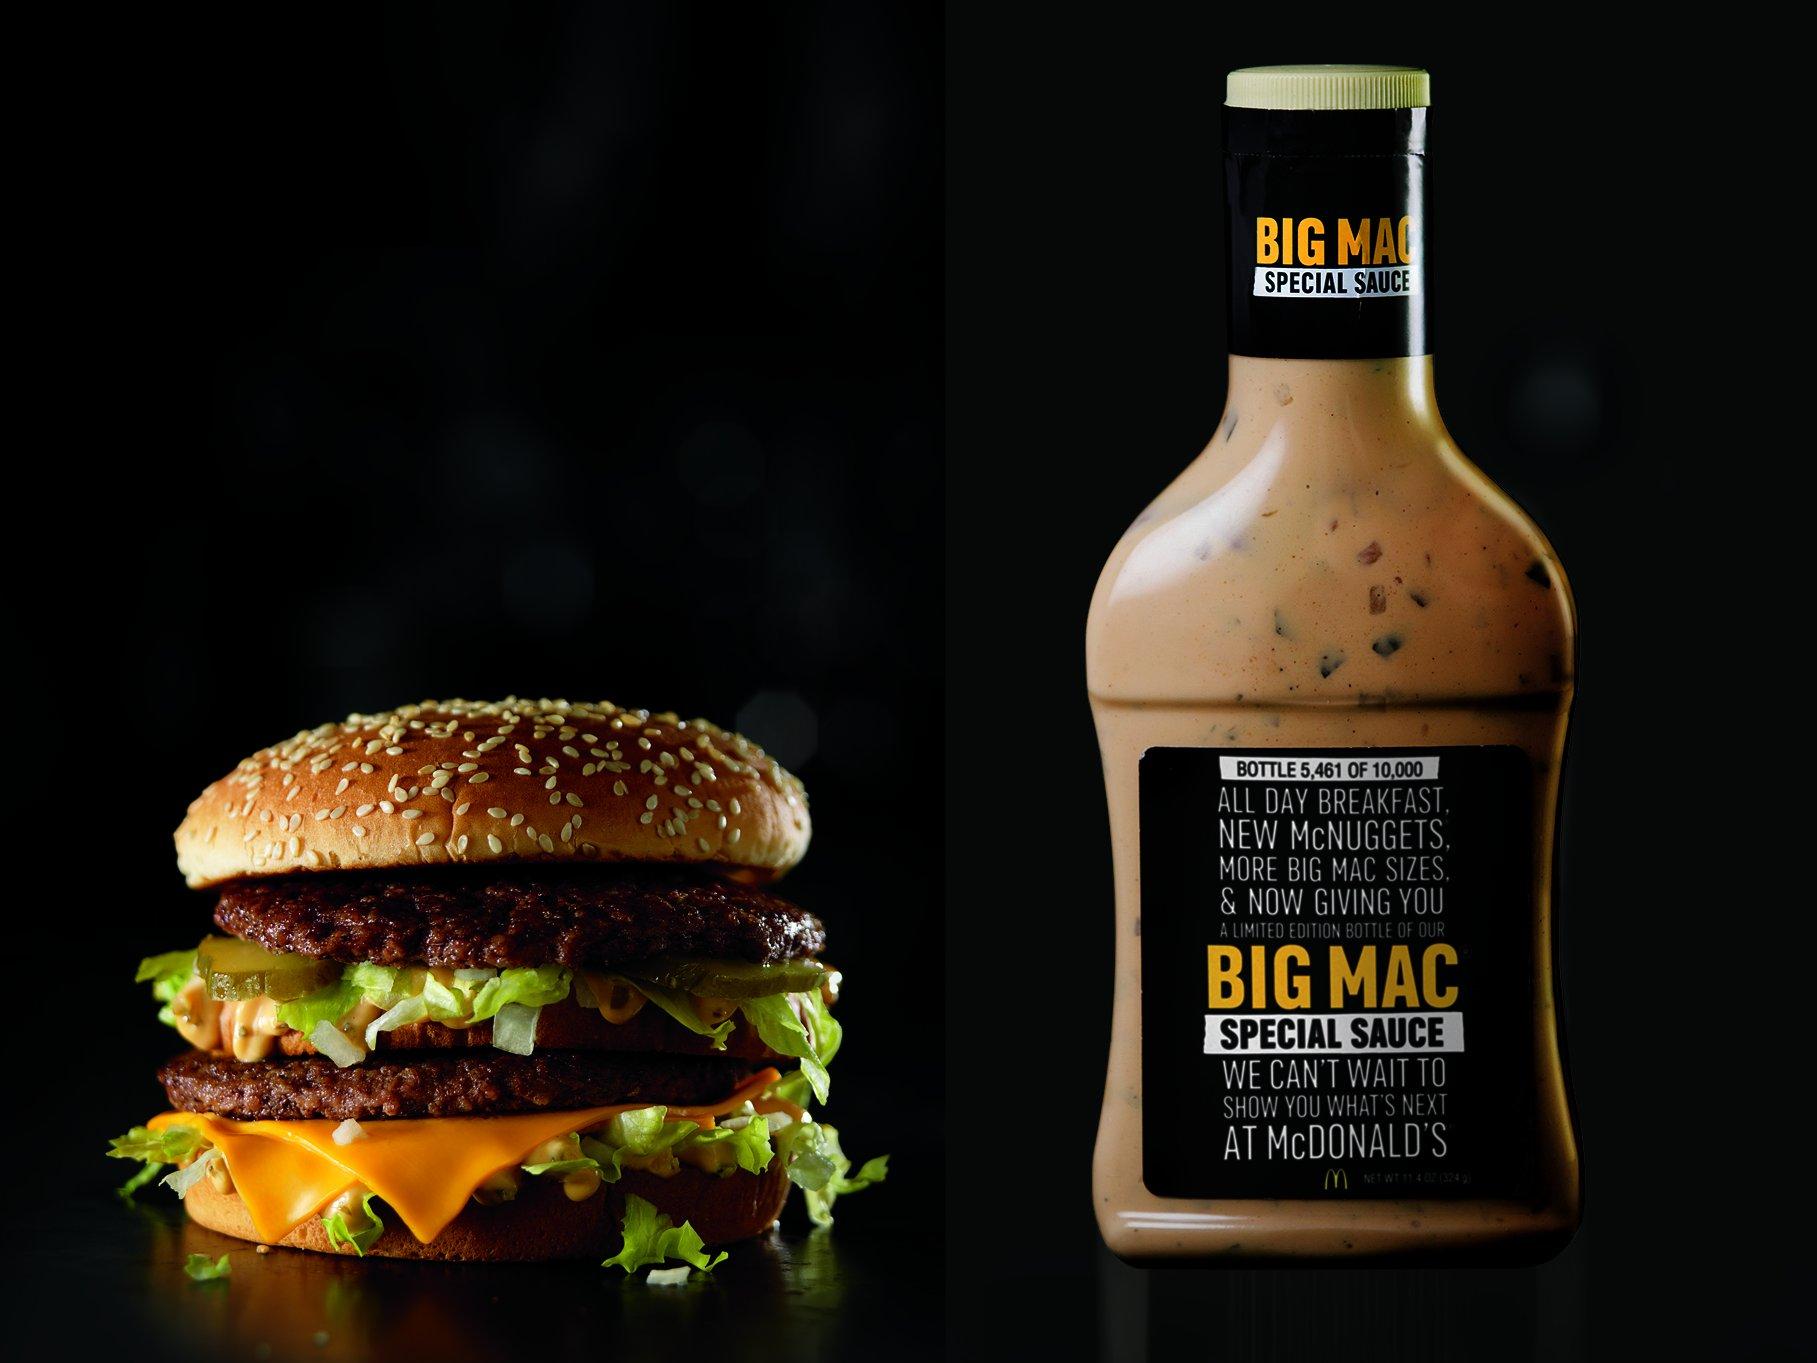 Mcdonald S Is Giving Away Bottles Of Big Mac Sauce For Free The Independent The Independent,Rotisserie Chicken Gif